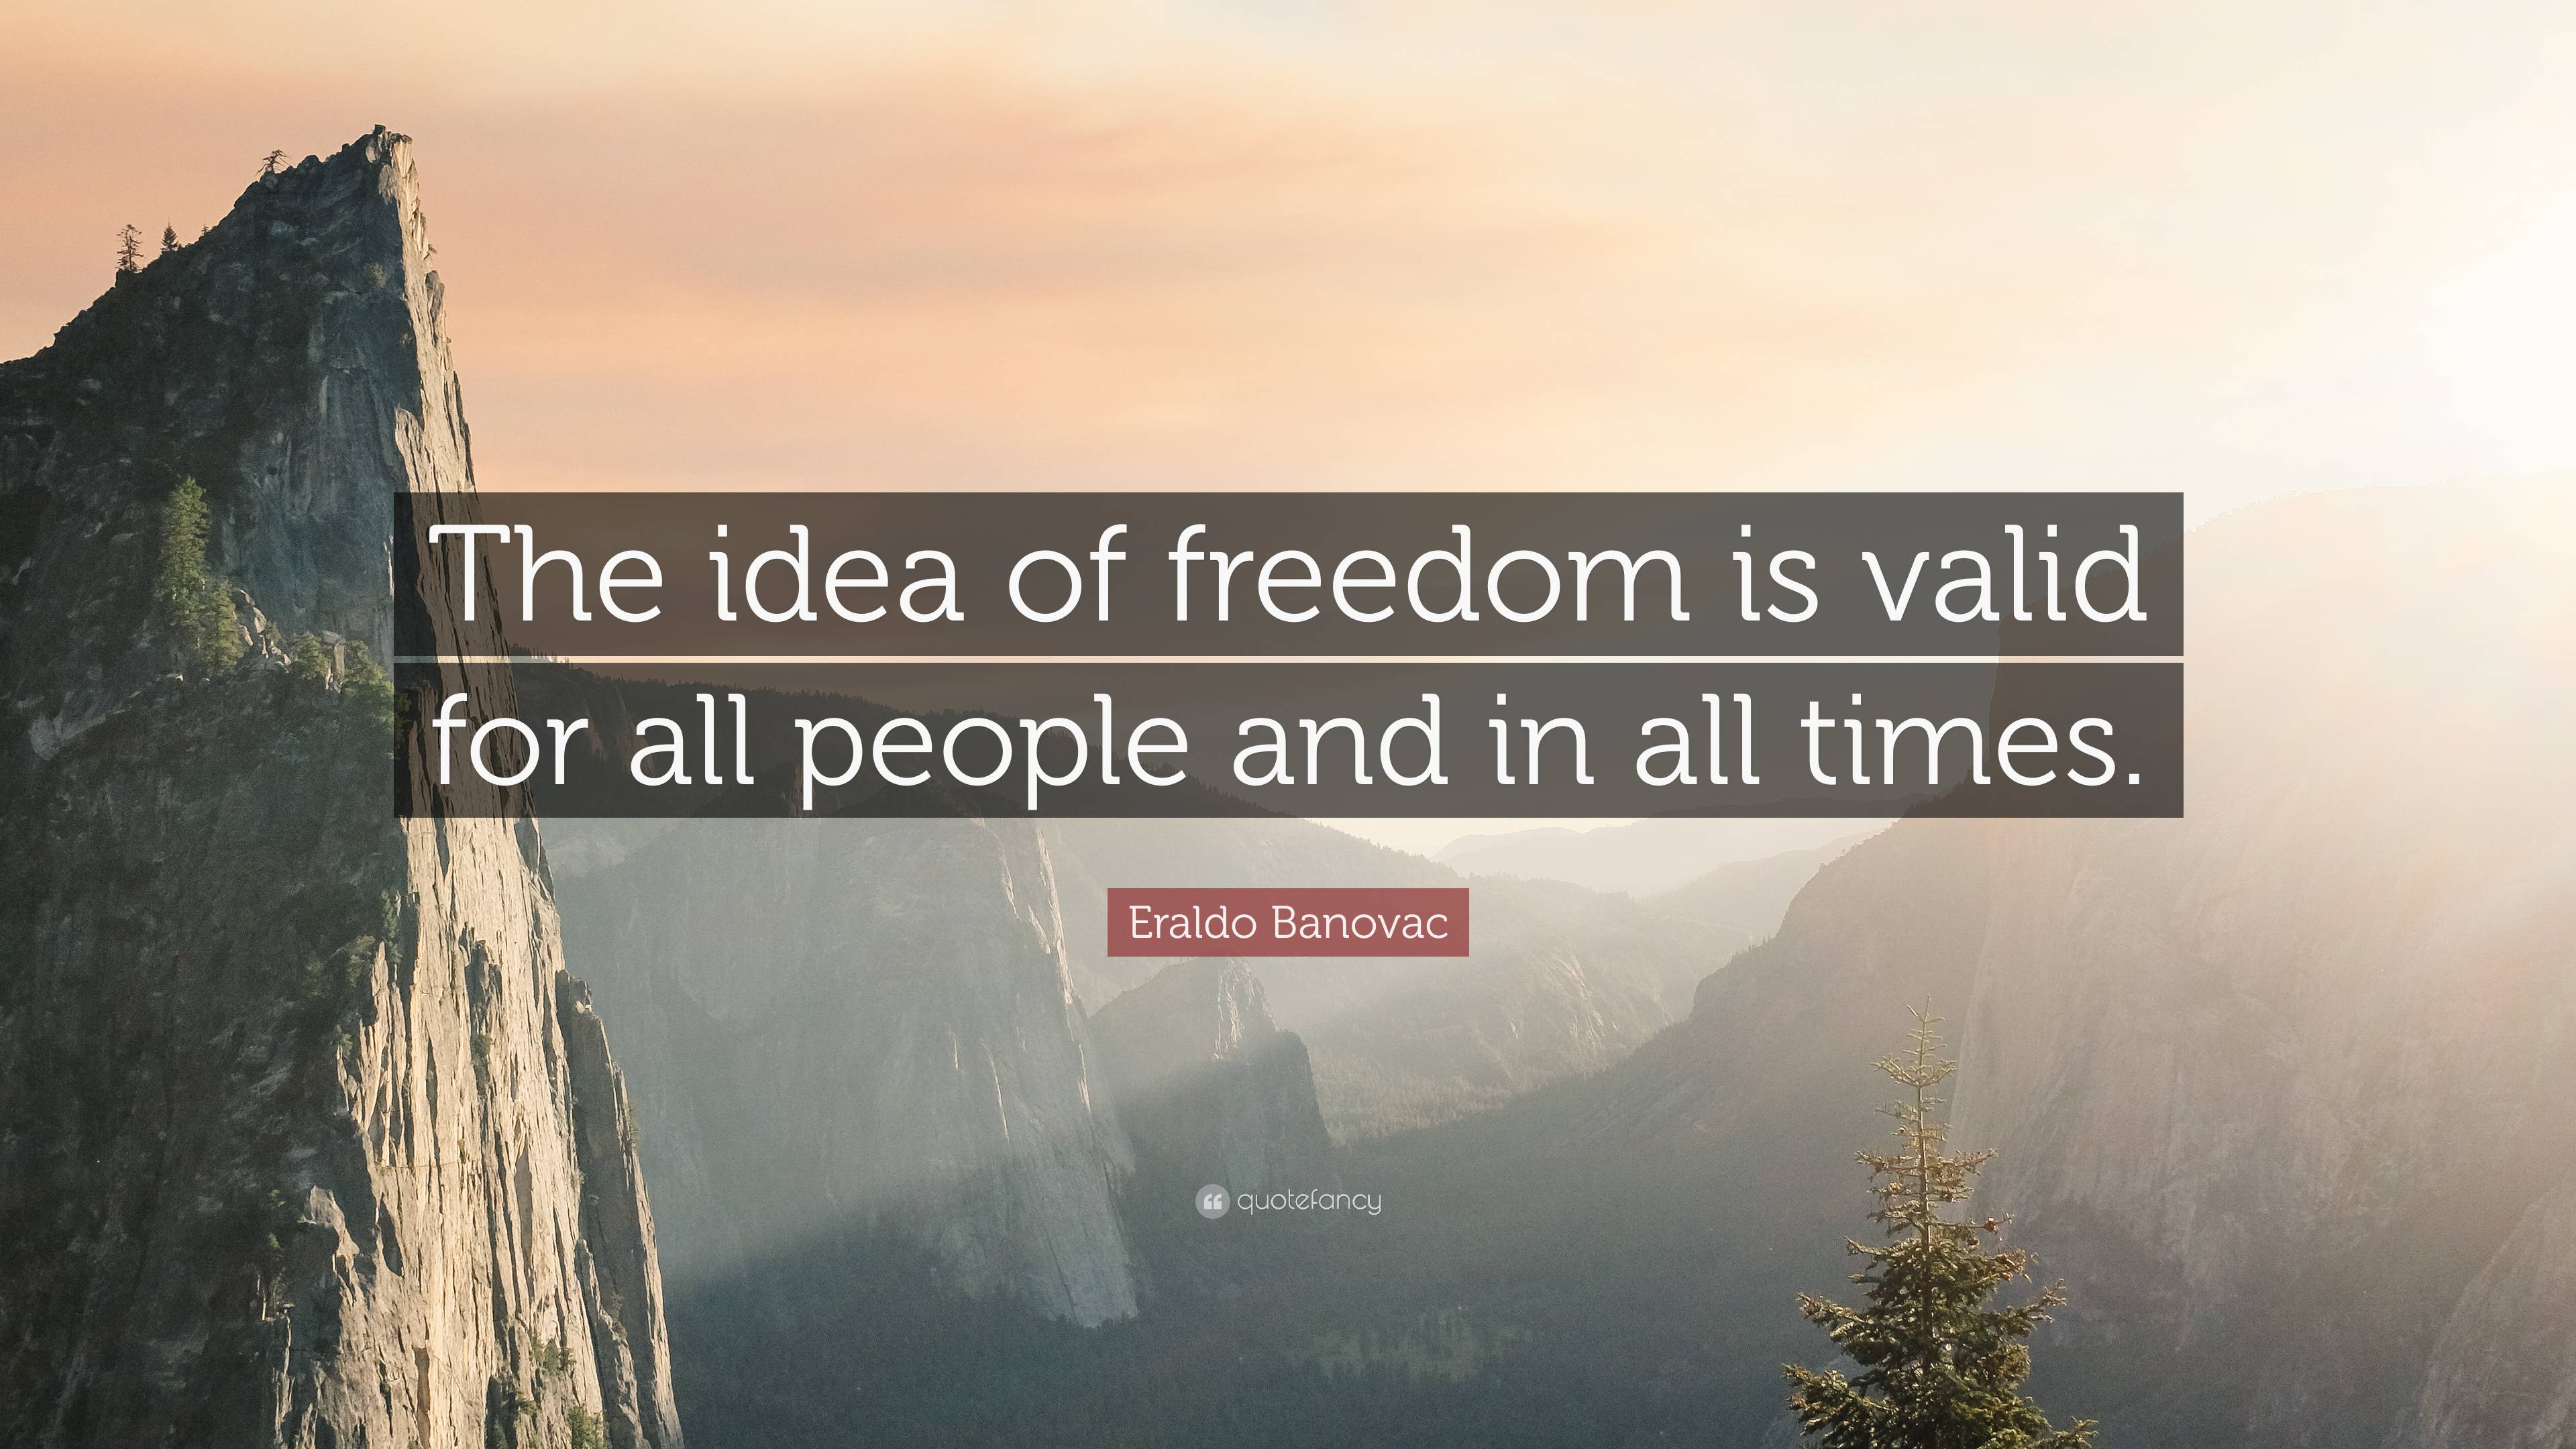 Eraldo Banovac Quote: “The idea of freedom is valid for all people and ...